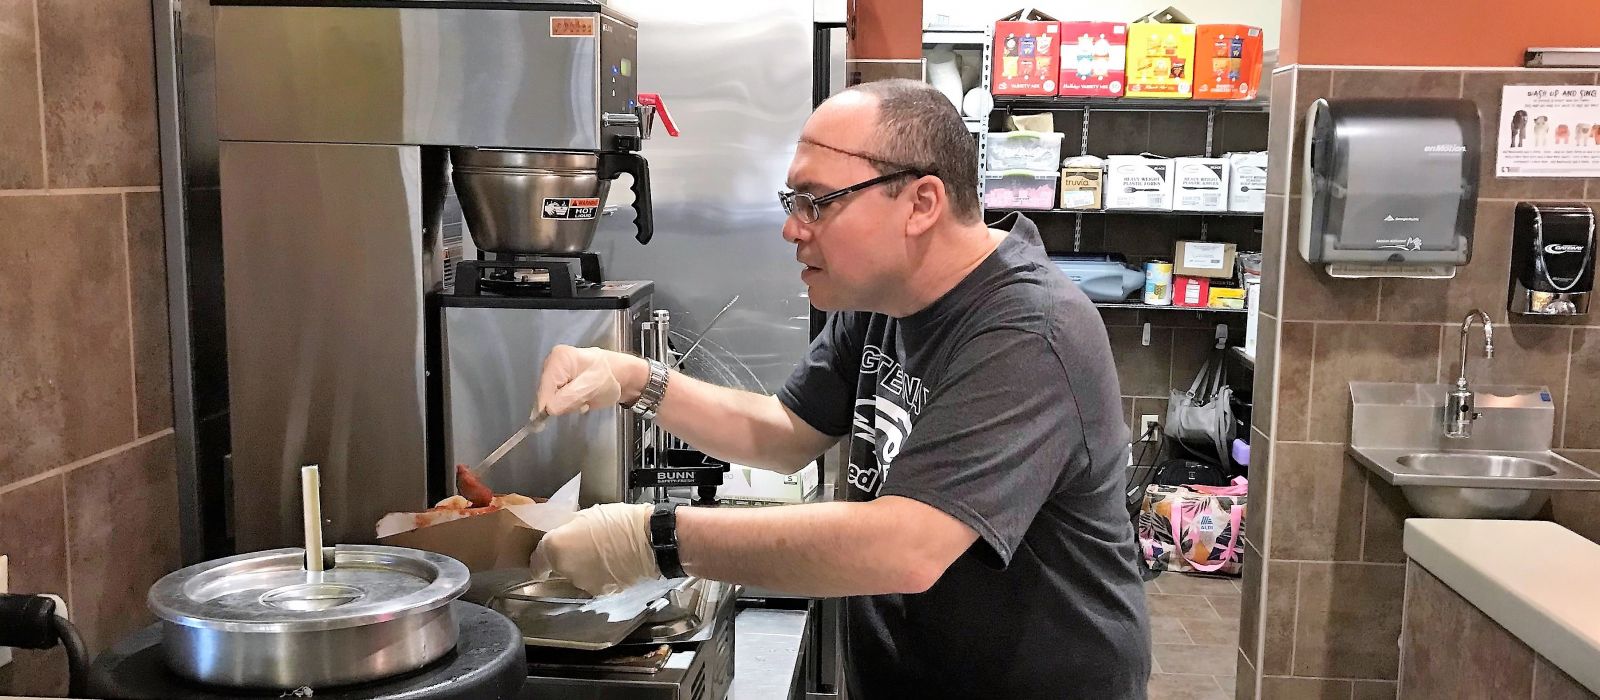 LCS participant in a dark gray t-shirt is holding a ladle and scooping marinara sauce onto a food order for a customer